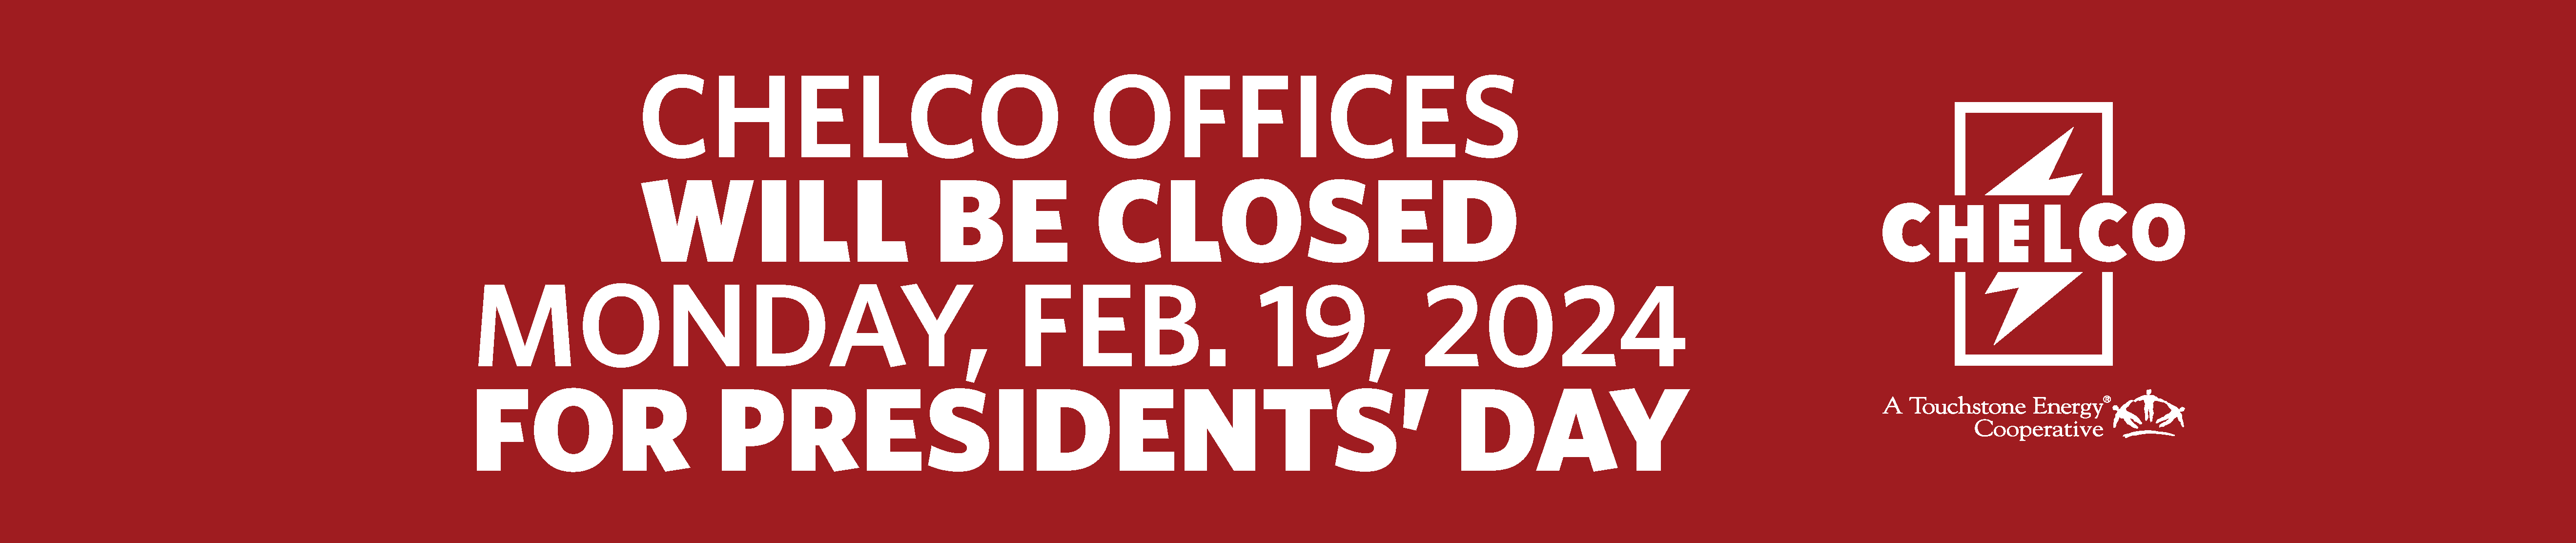 Presidents' Day Office Closure 2024